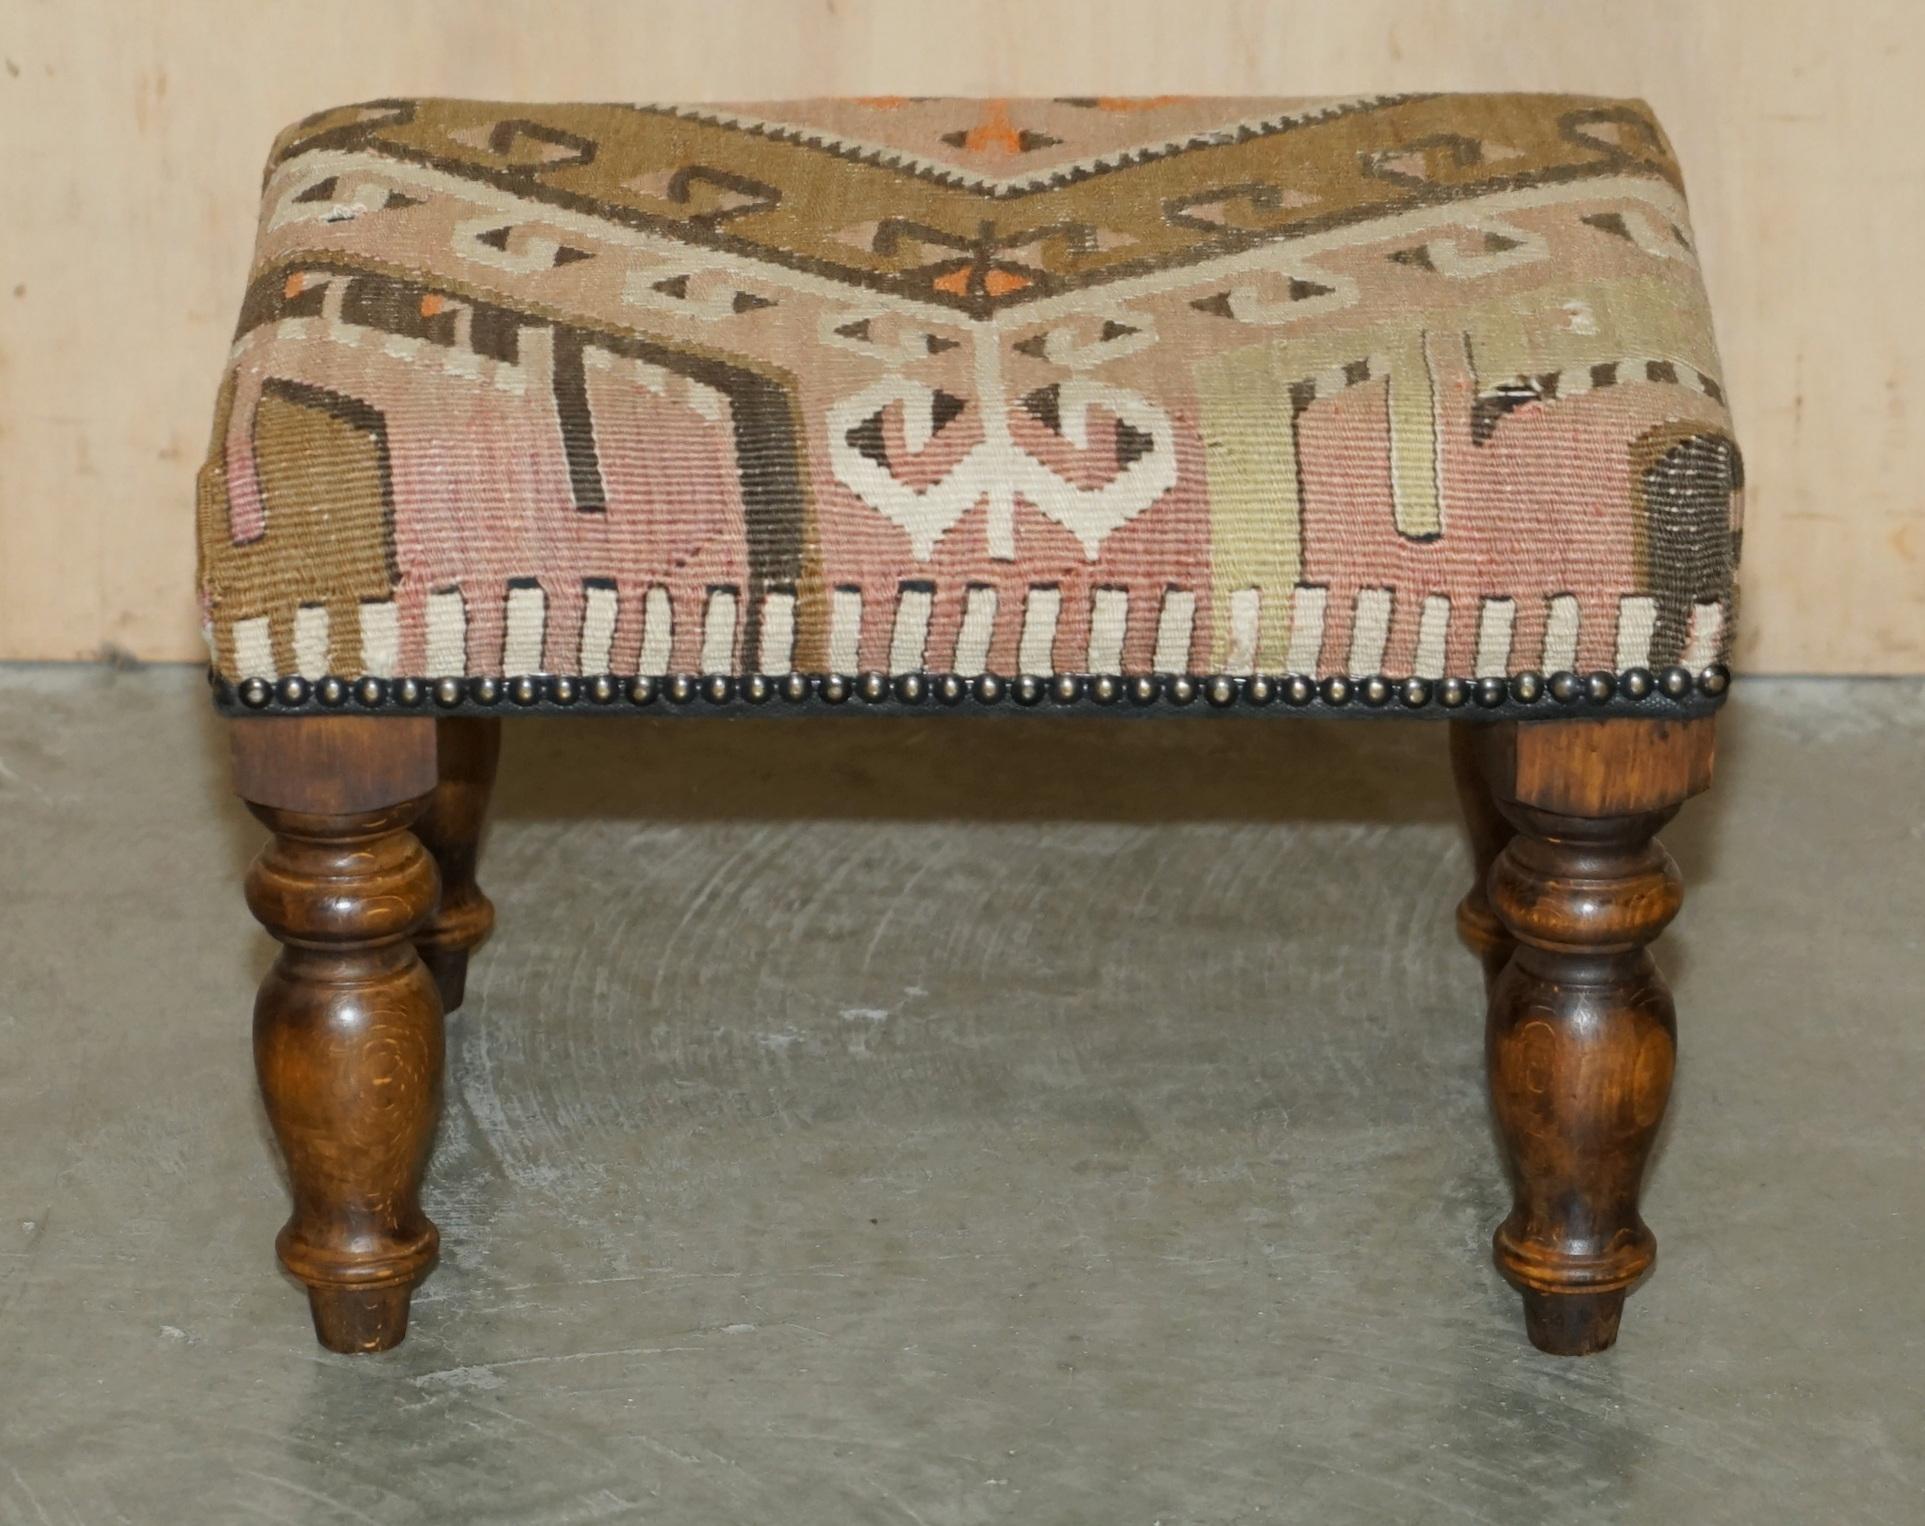 STUNNiNG & COLLECTABLE GEORGE SMITH CHELSEA KILIM FOOTSTOOL OTTOMAN en vente 1